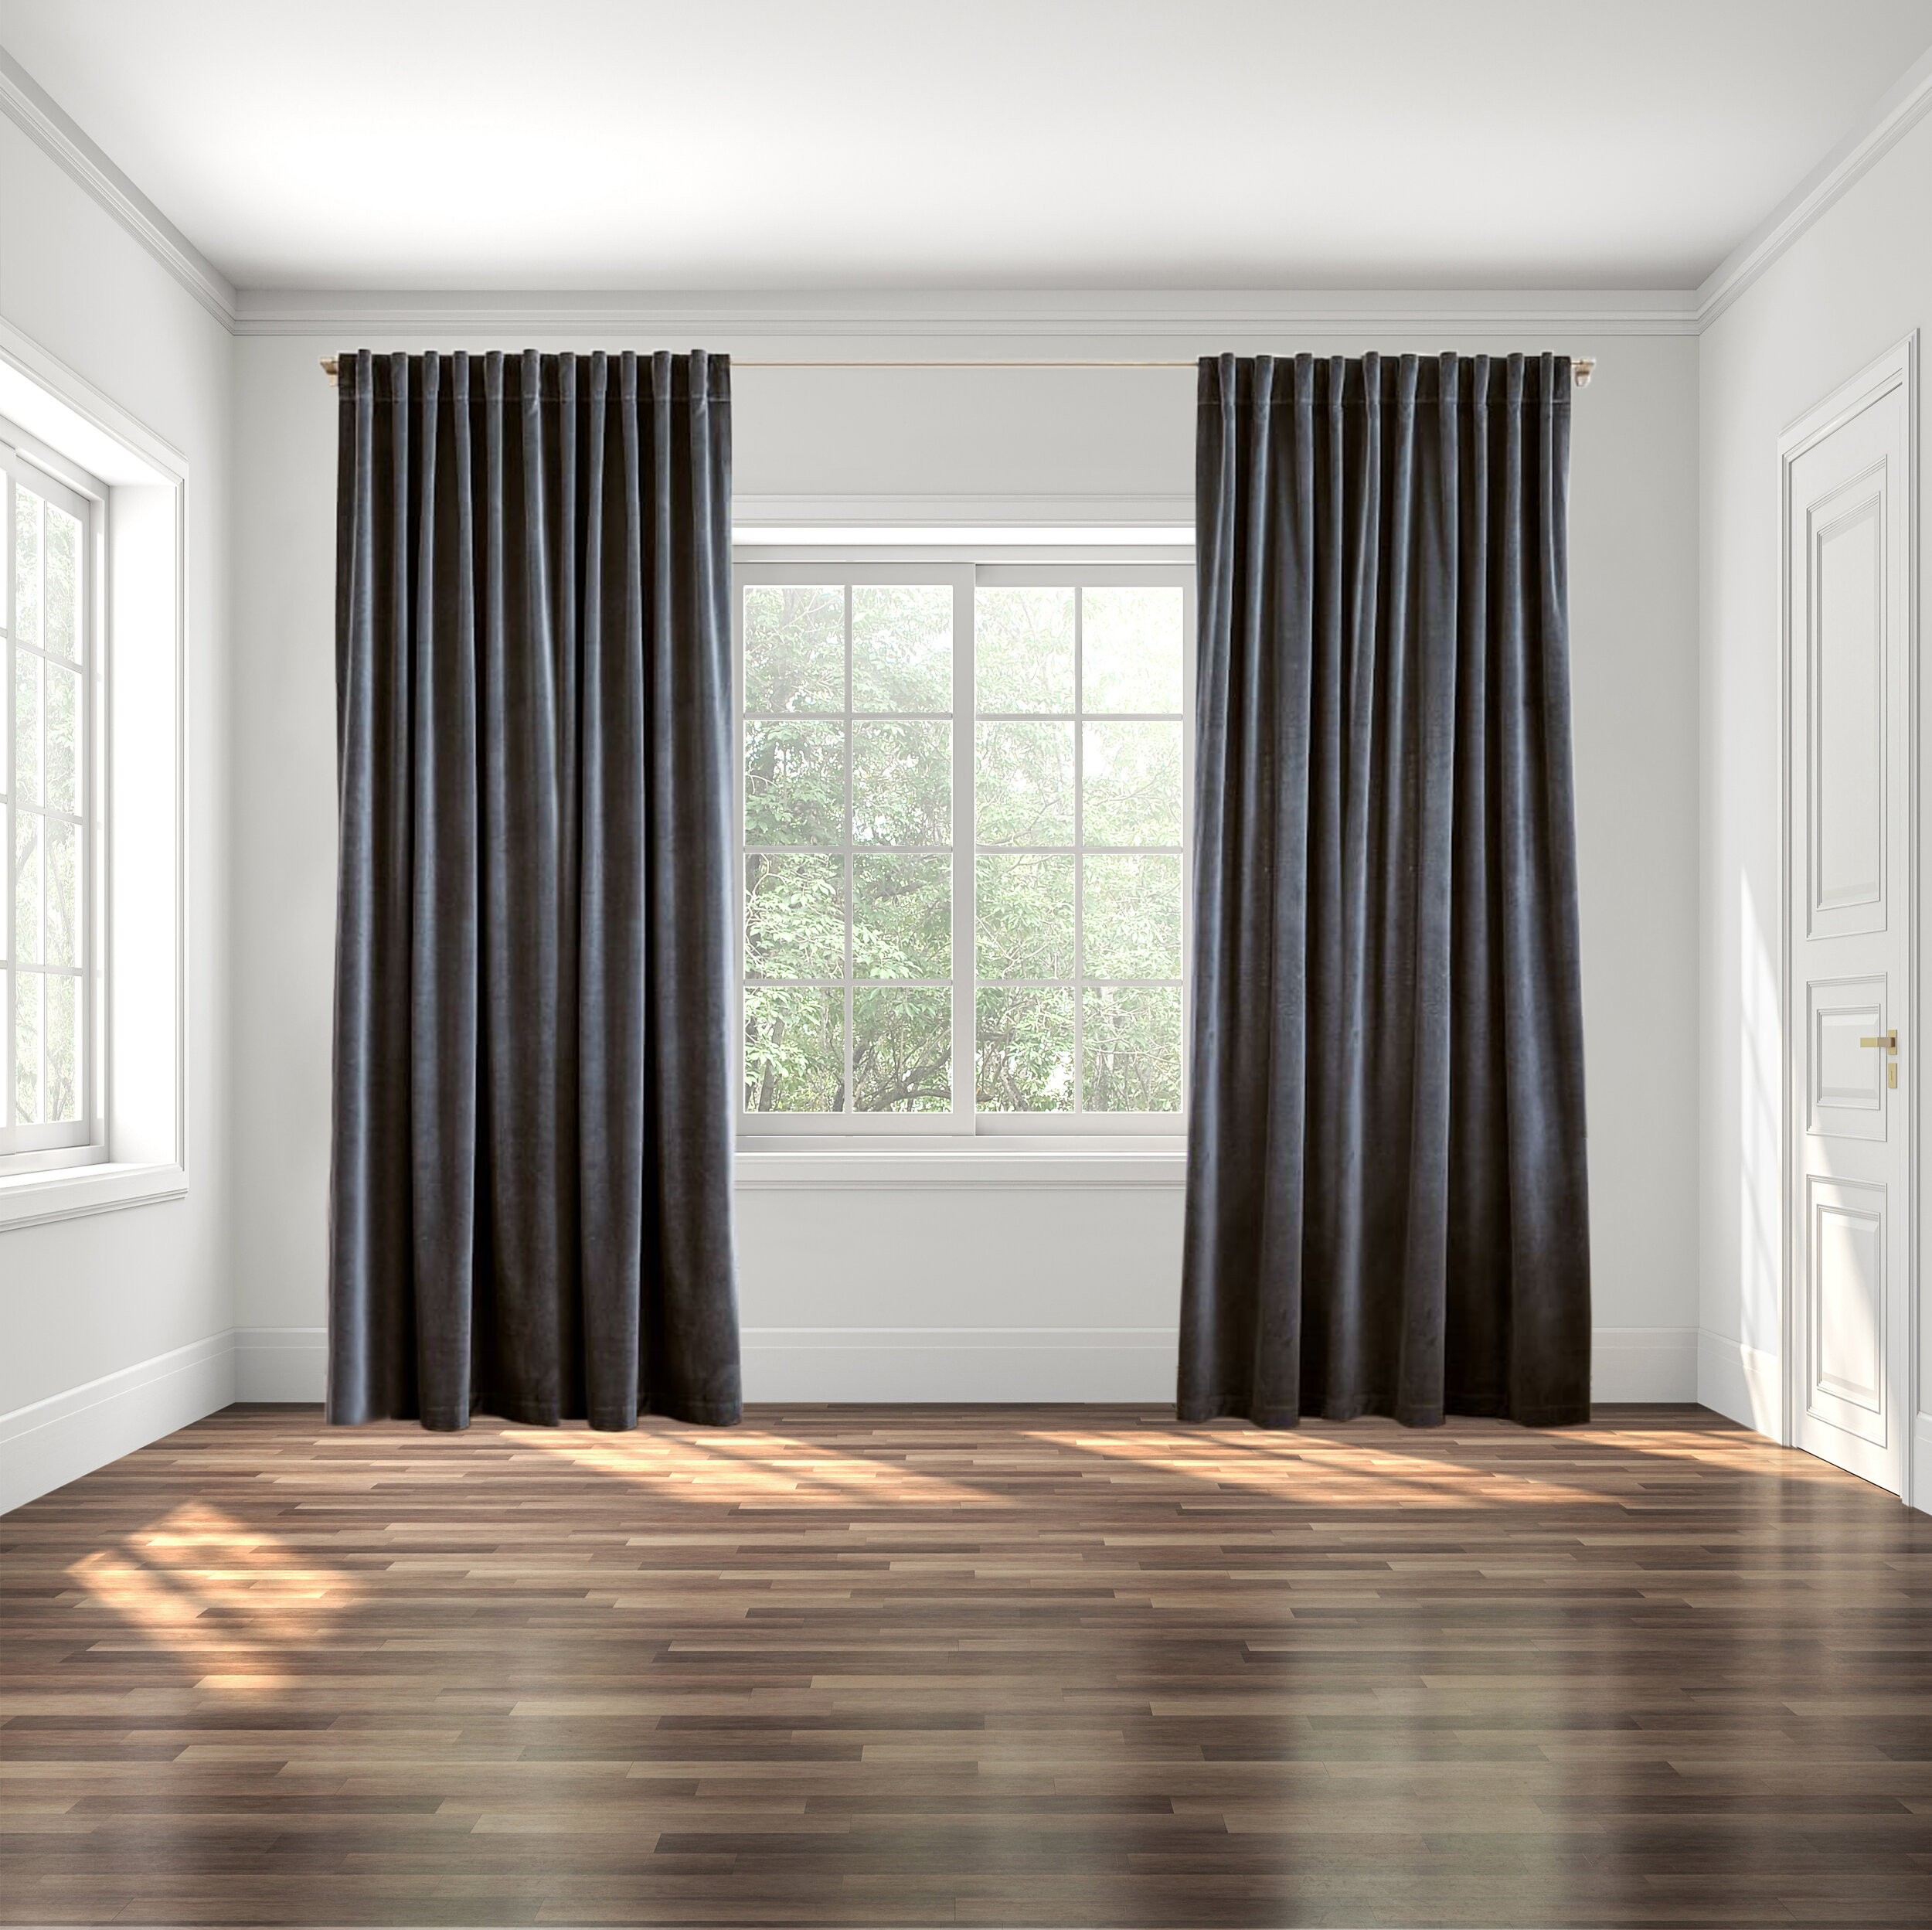 Bargain Blinds & Curtains - The way curtains drape is all down to